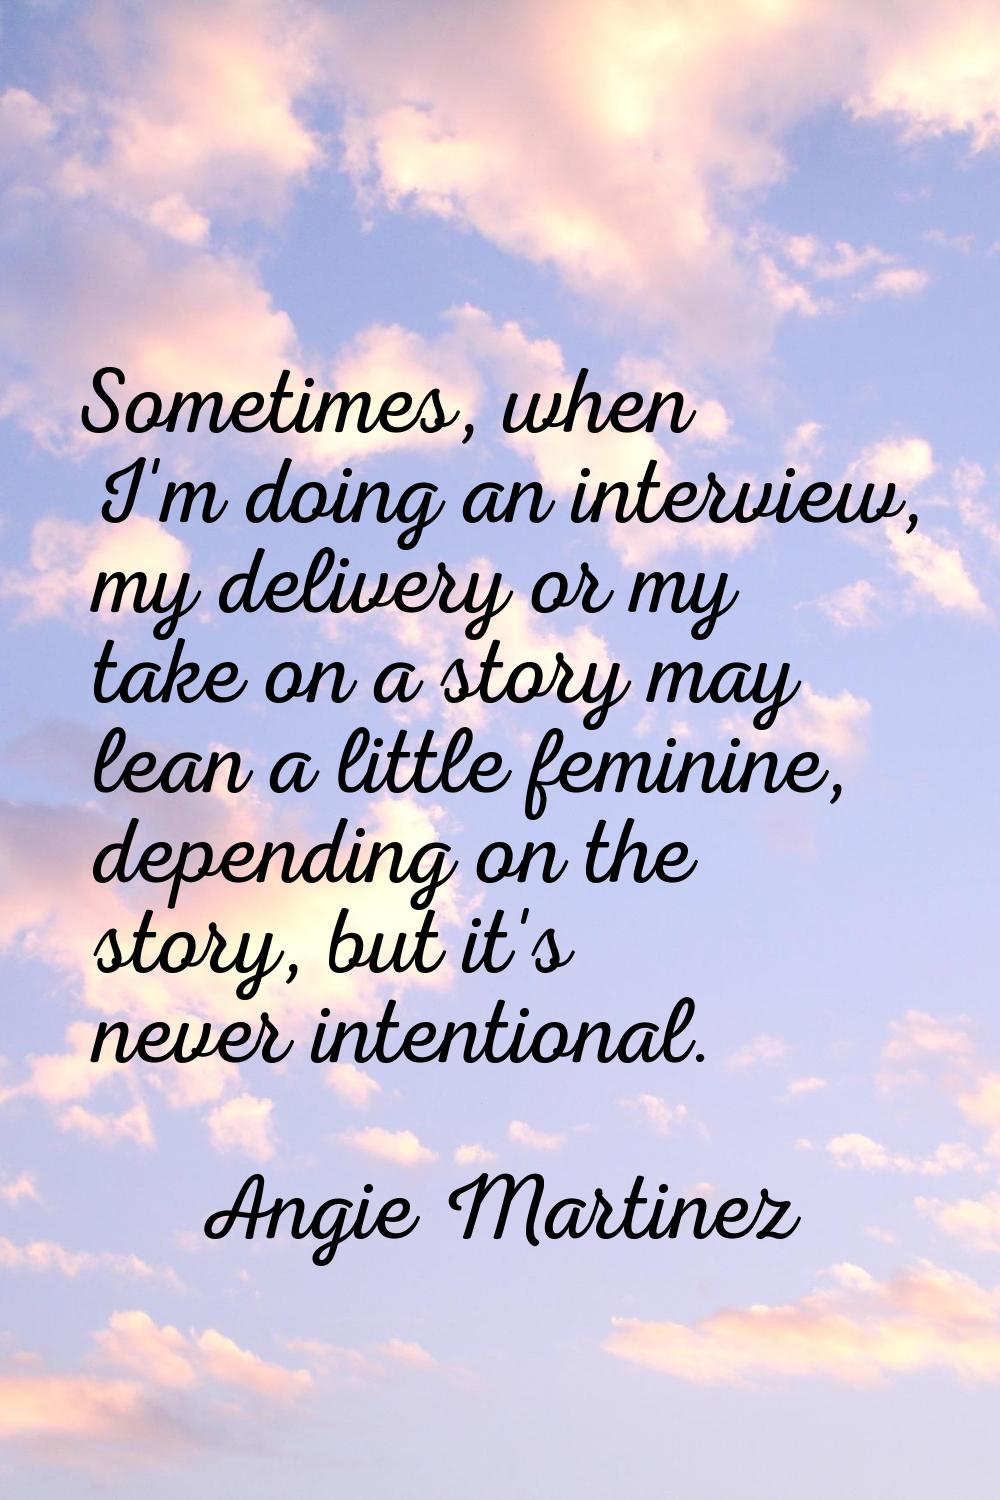 Sometimes, when I'm doing an interview, my delivery or my take on a story may lean a little feminin